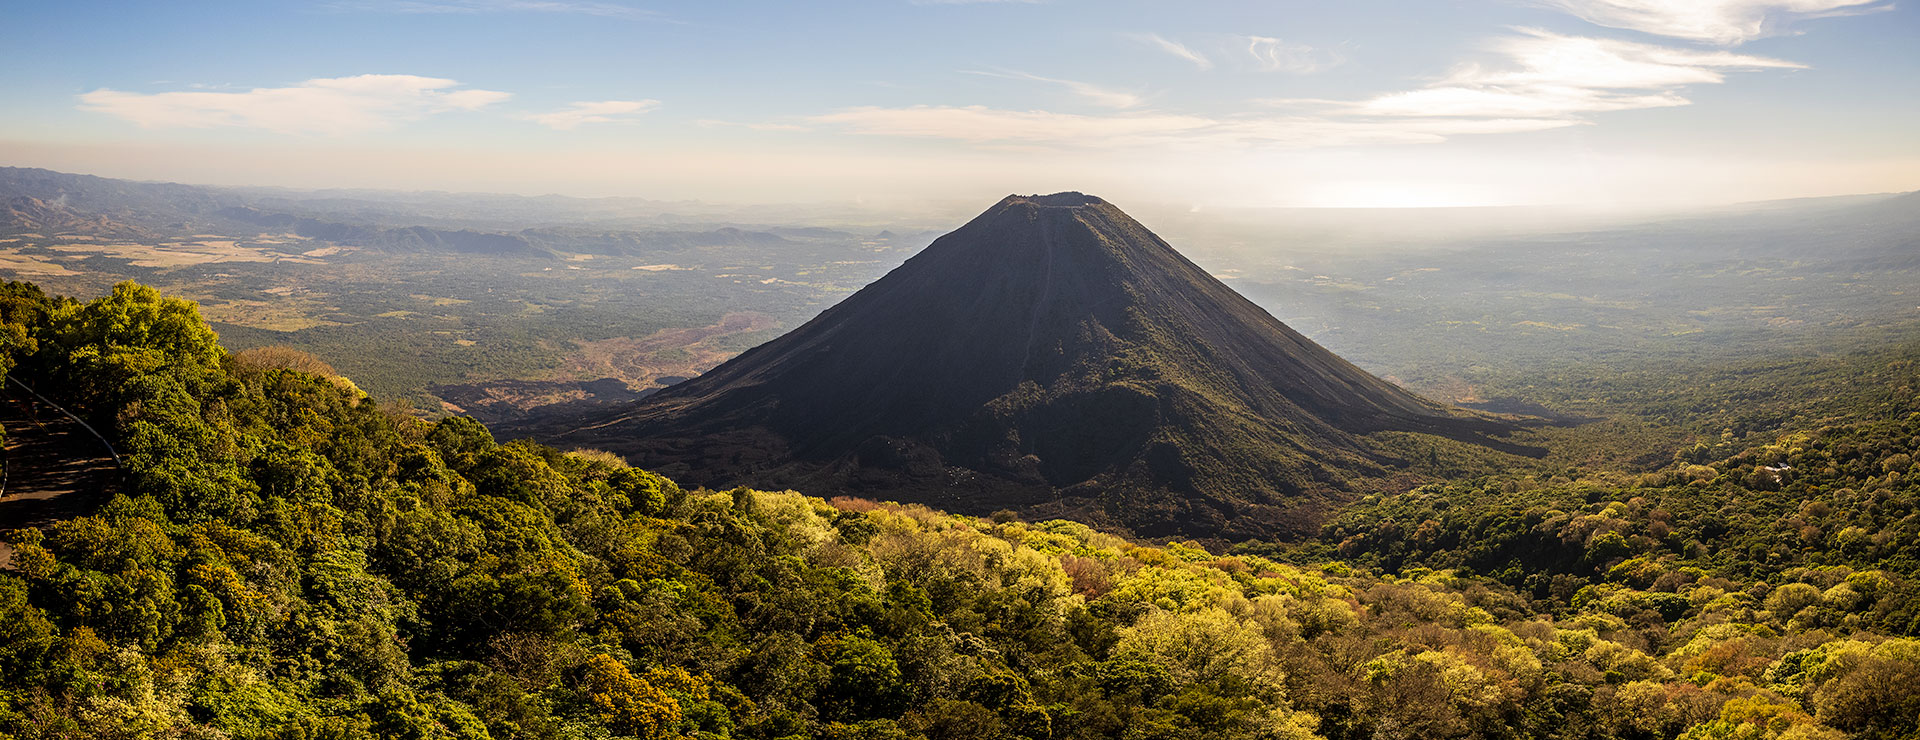 How to See El Salvador Like an Insider 1